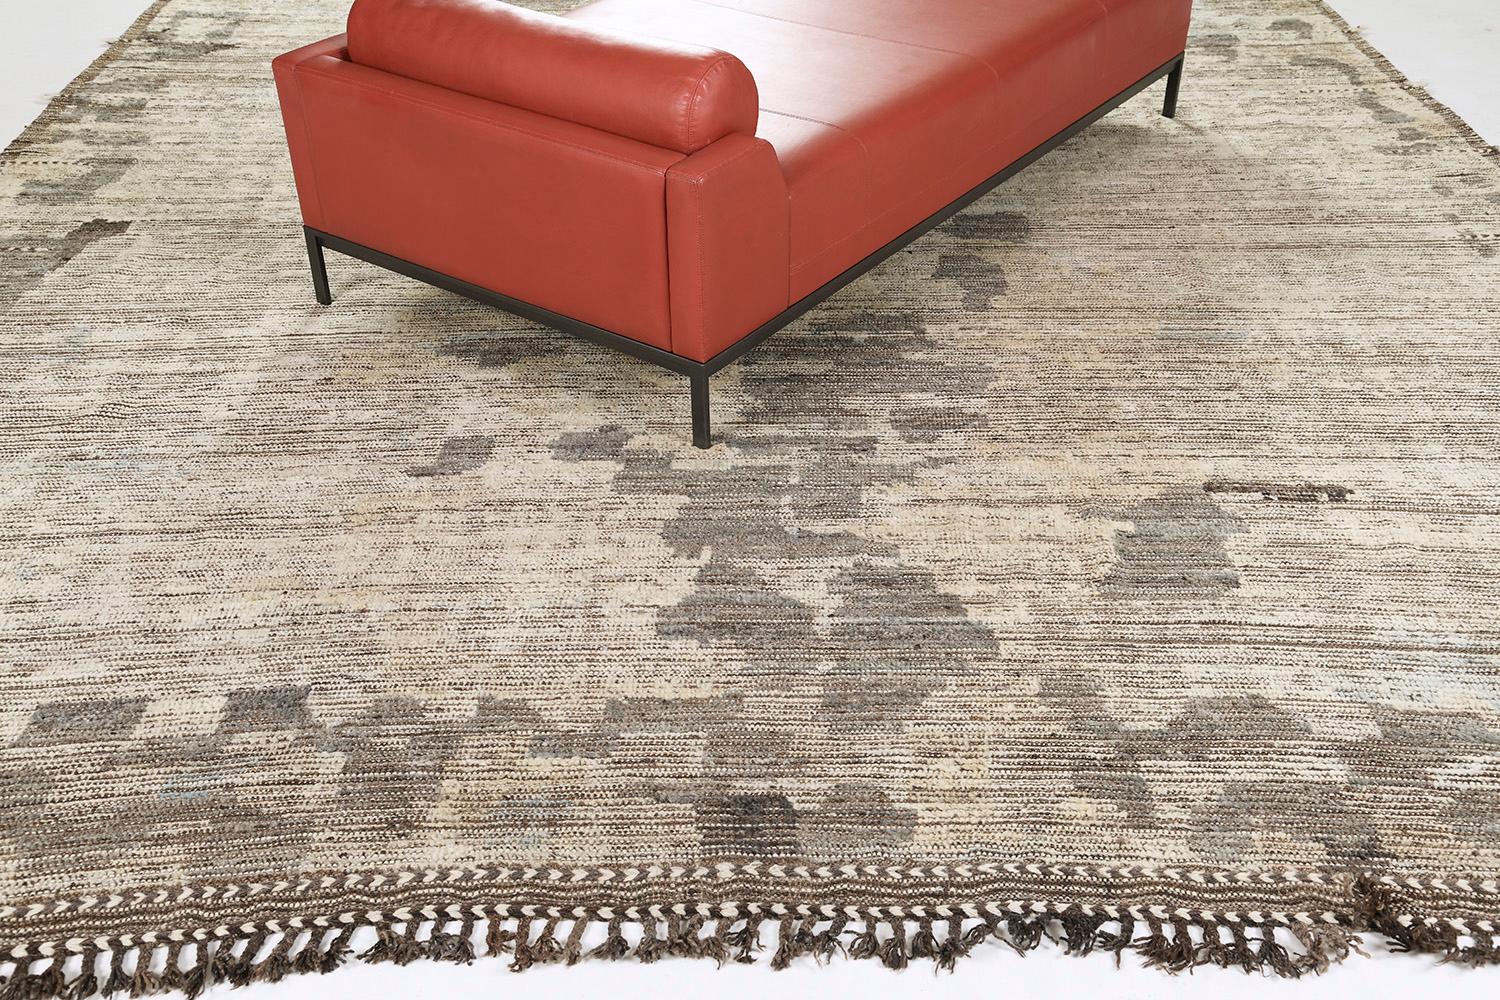 Zazate' is made of luxurious wool and is made of timeless design elements. Its weaving of natural earth tones and unique design elements is what makes the Atlas Collection so unique and sought after. Mehraban's Atlas collection is noted for their